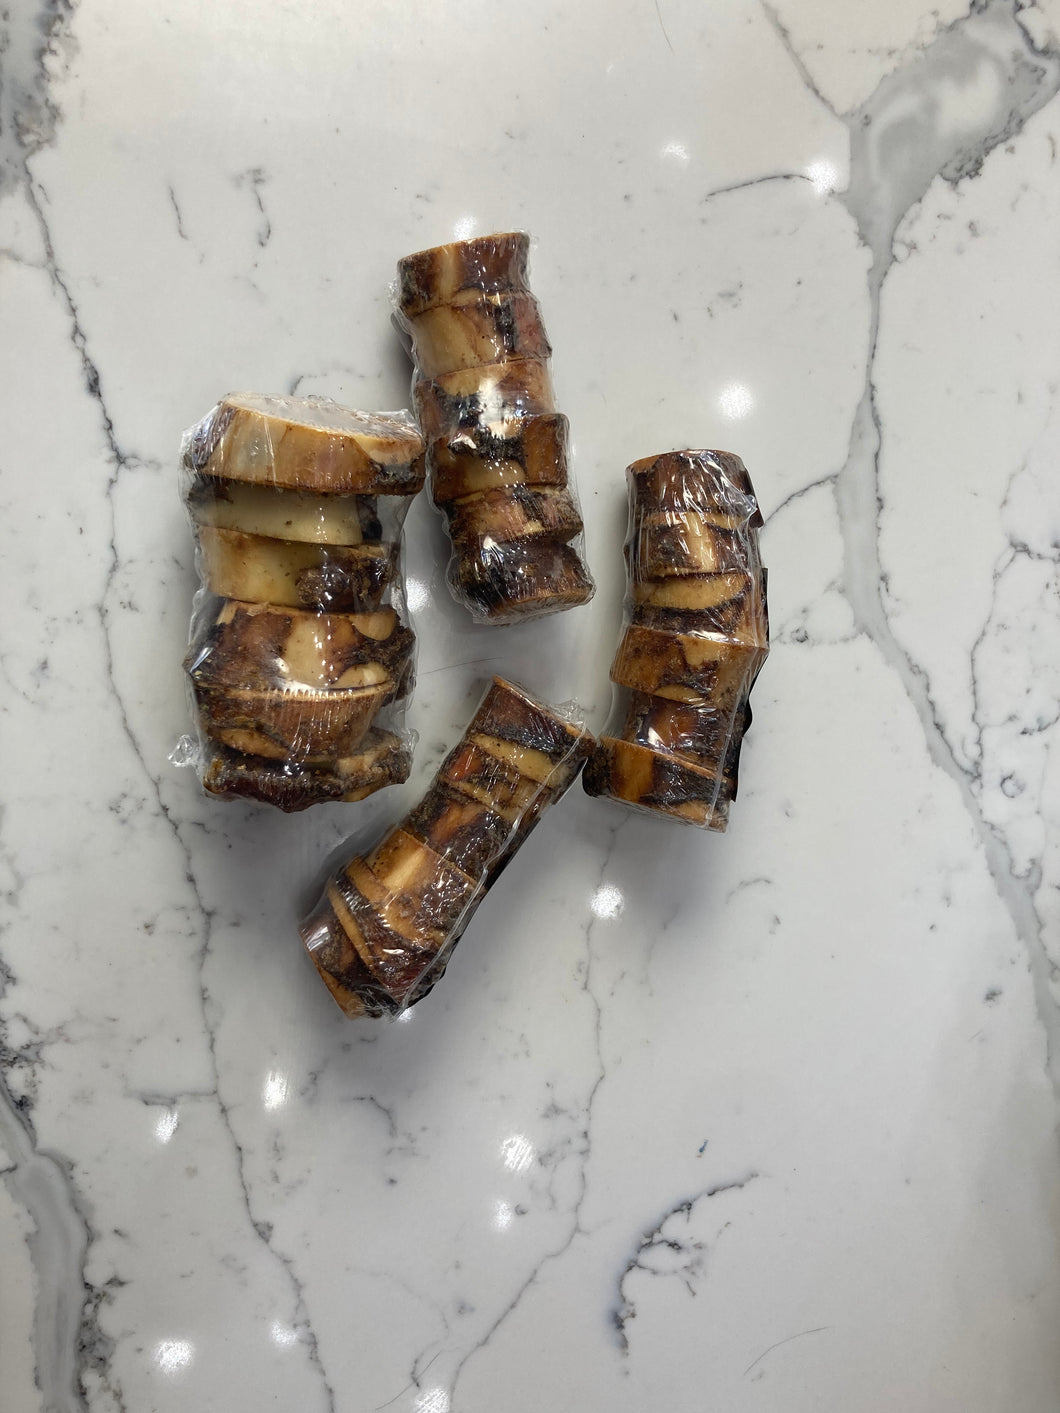 Butcher's Prime Doggie Delight Bones.- For Small Dogs and Pups